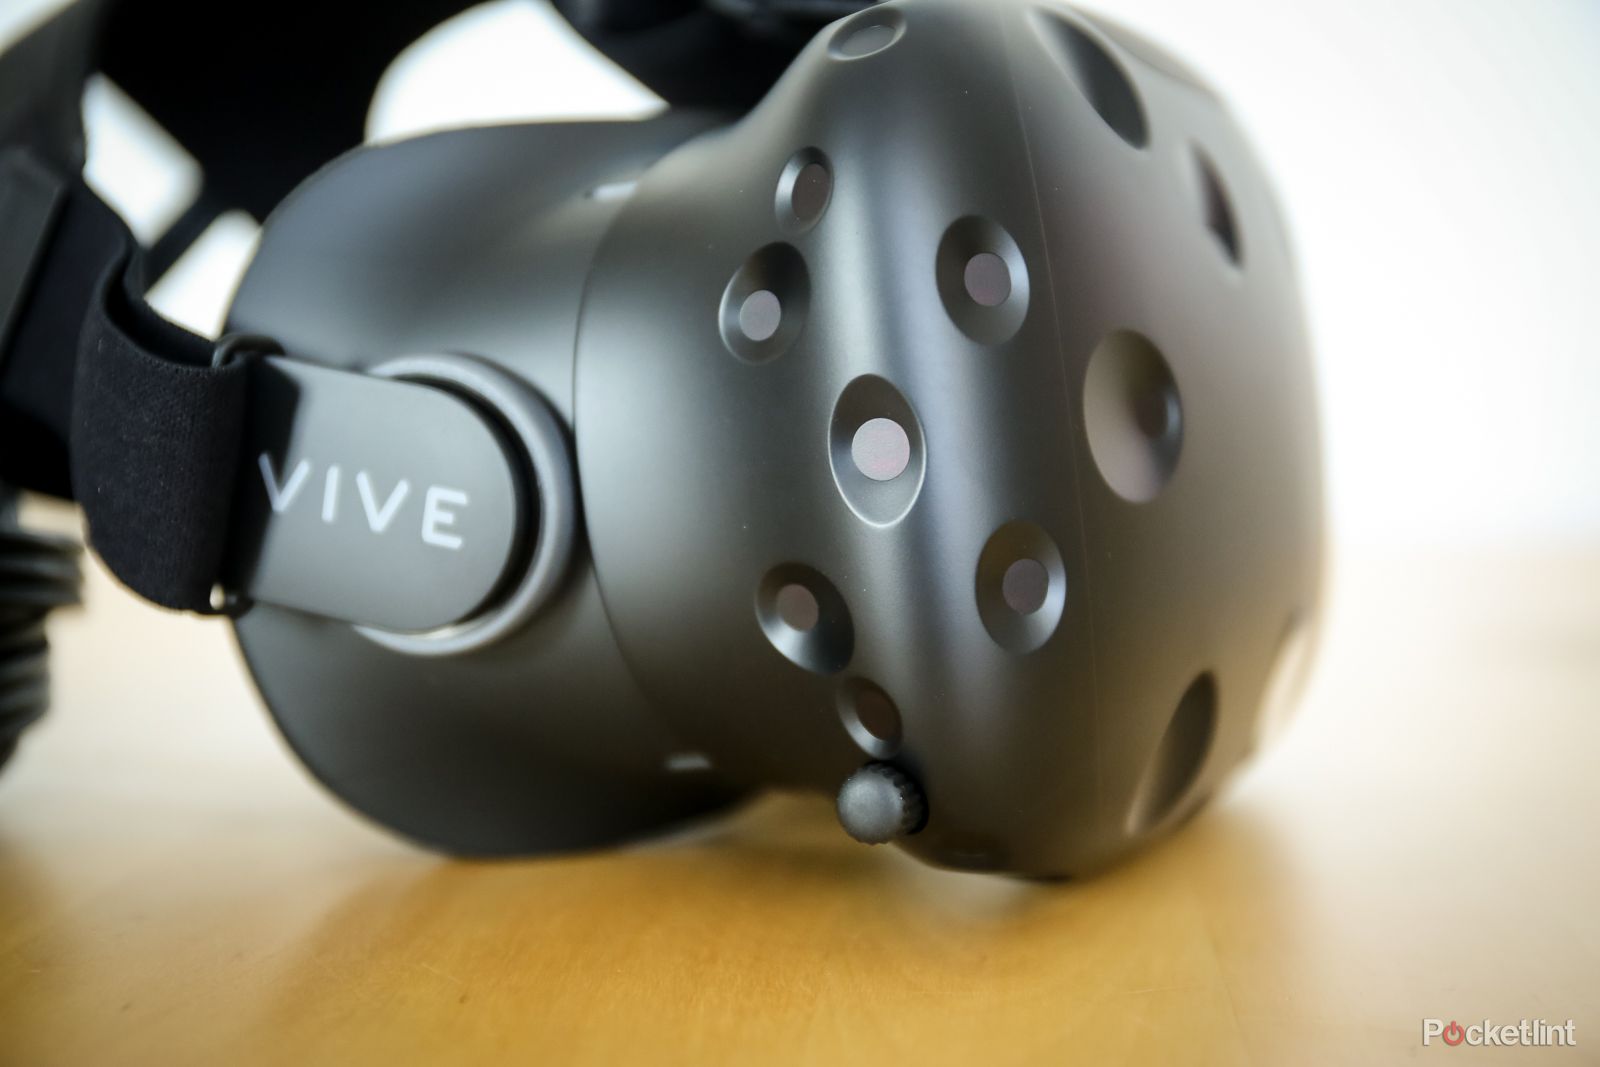 htc vive price soars thanks to brexit oculus rift to follow  image 1